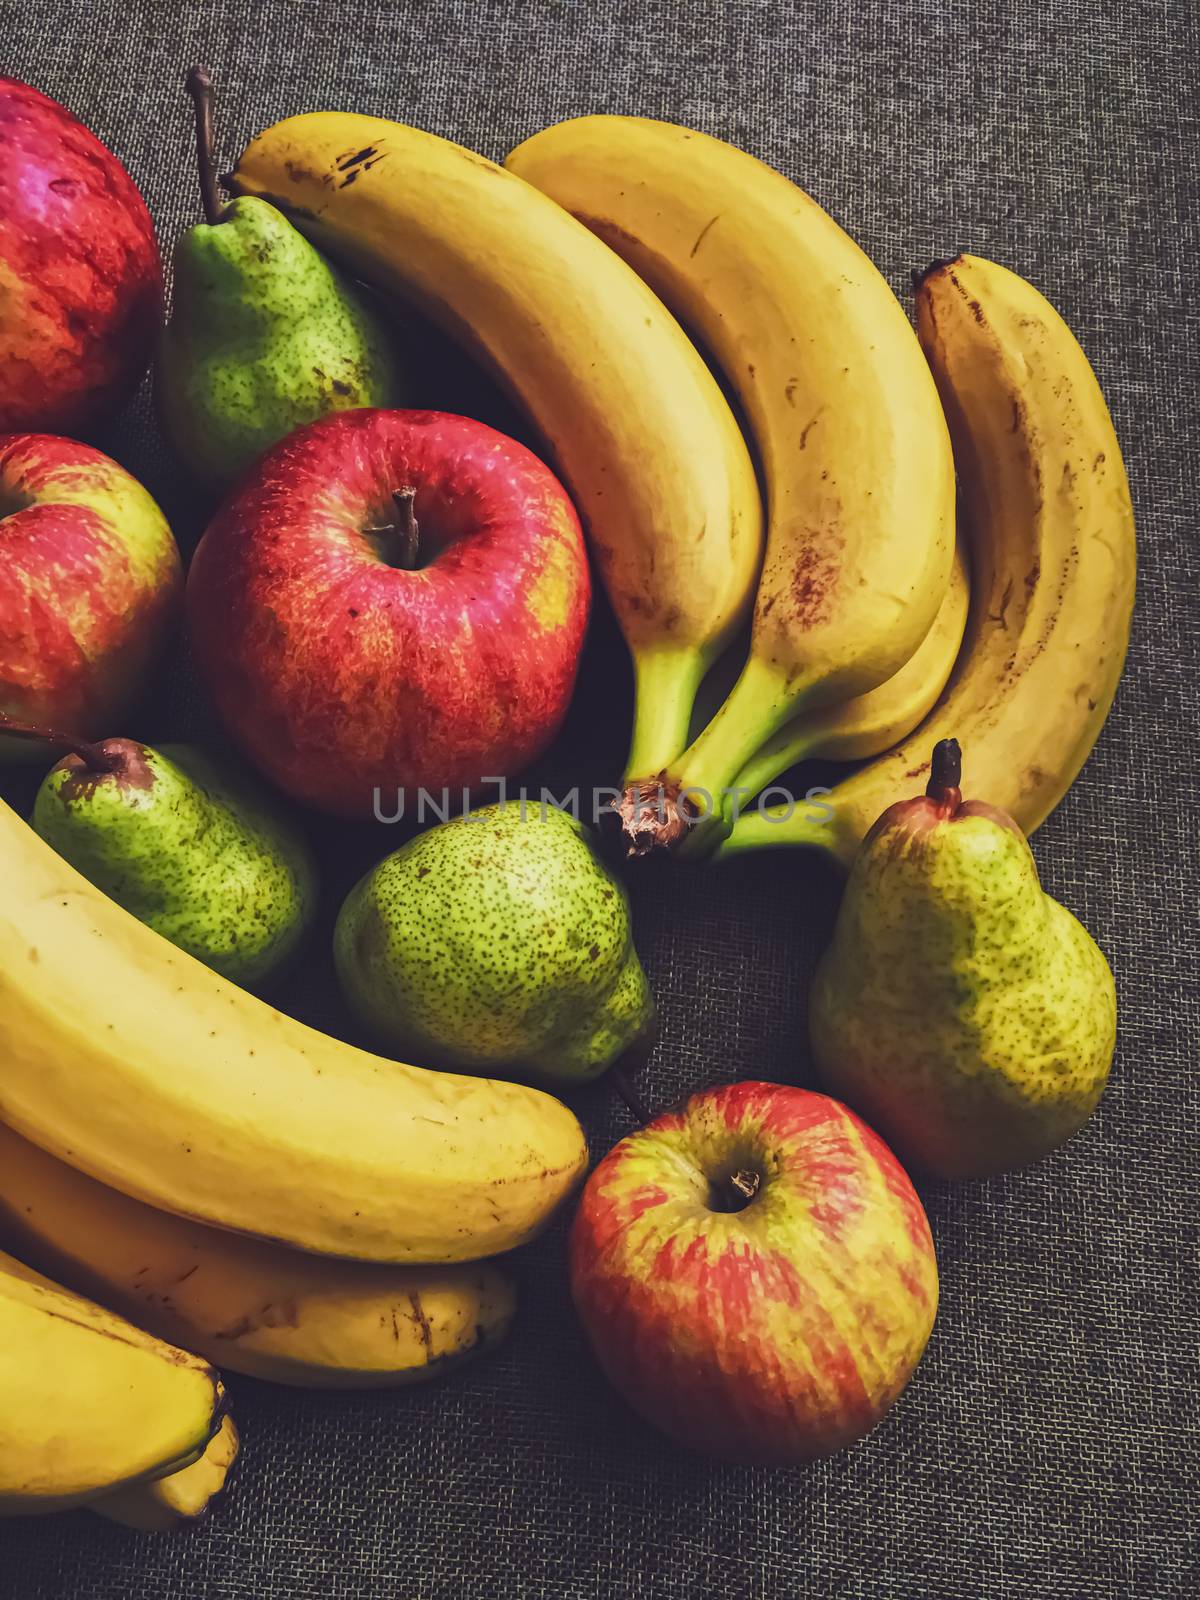 Organic apples, pears and bananas on rustic linen background, fruits farming and agriculture